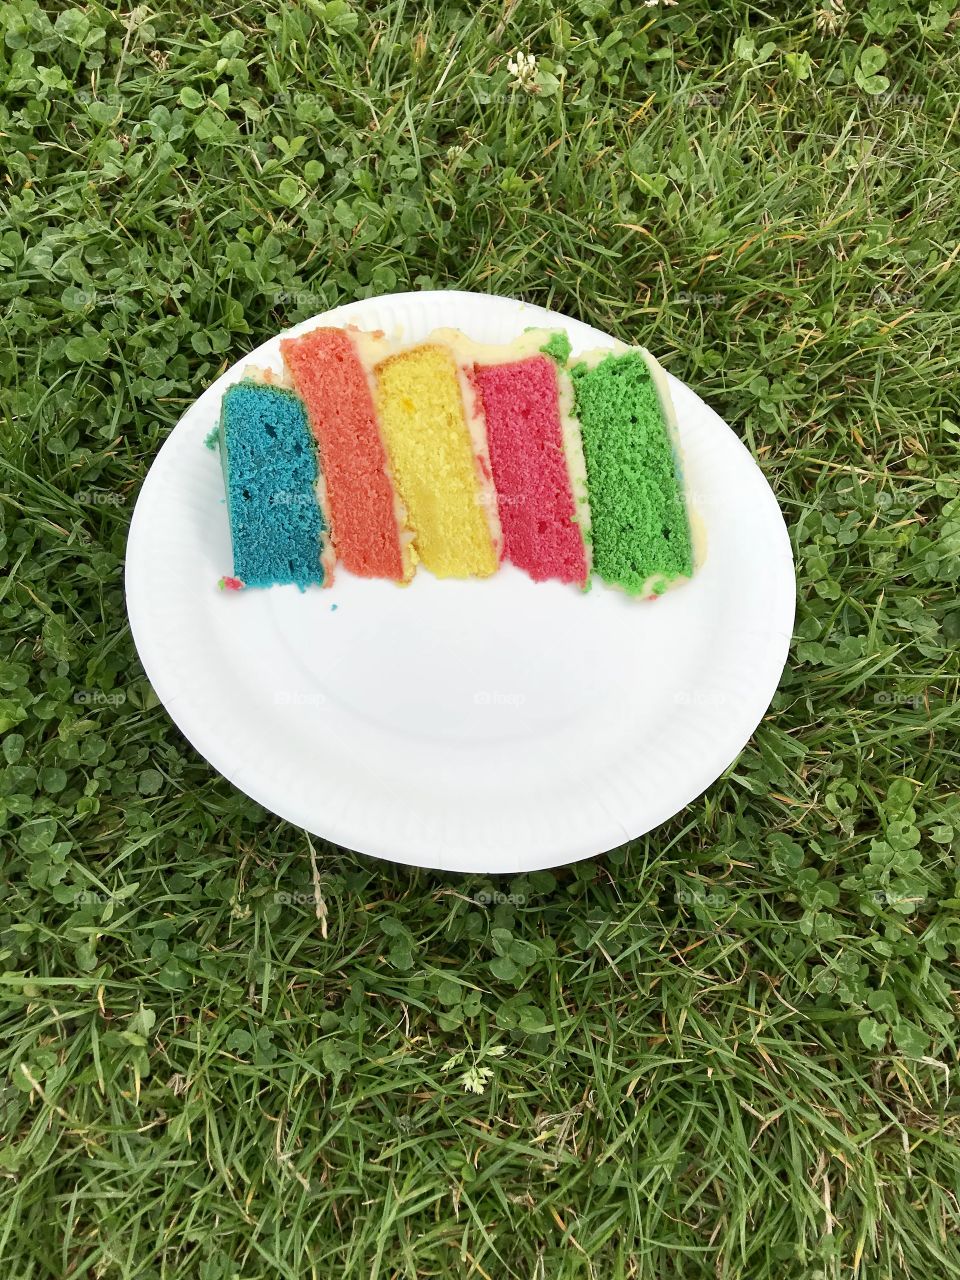 Big slice of rainbow cake set on a white paper plate  with a background of lush green grass